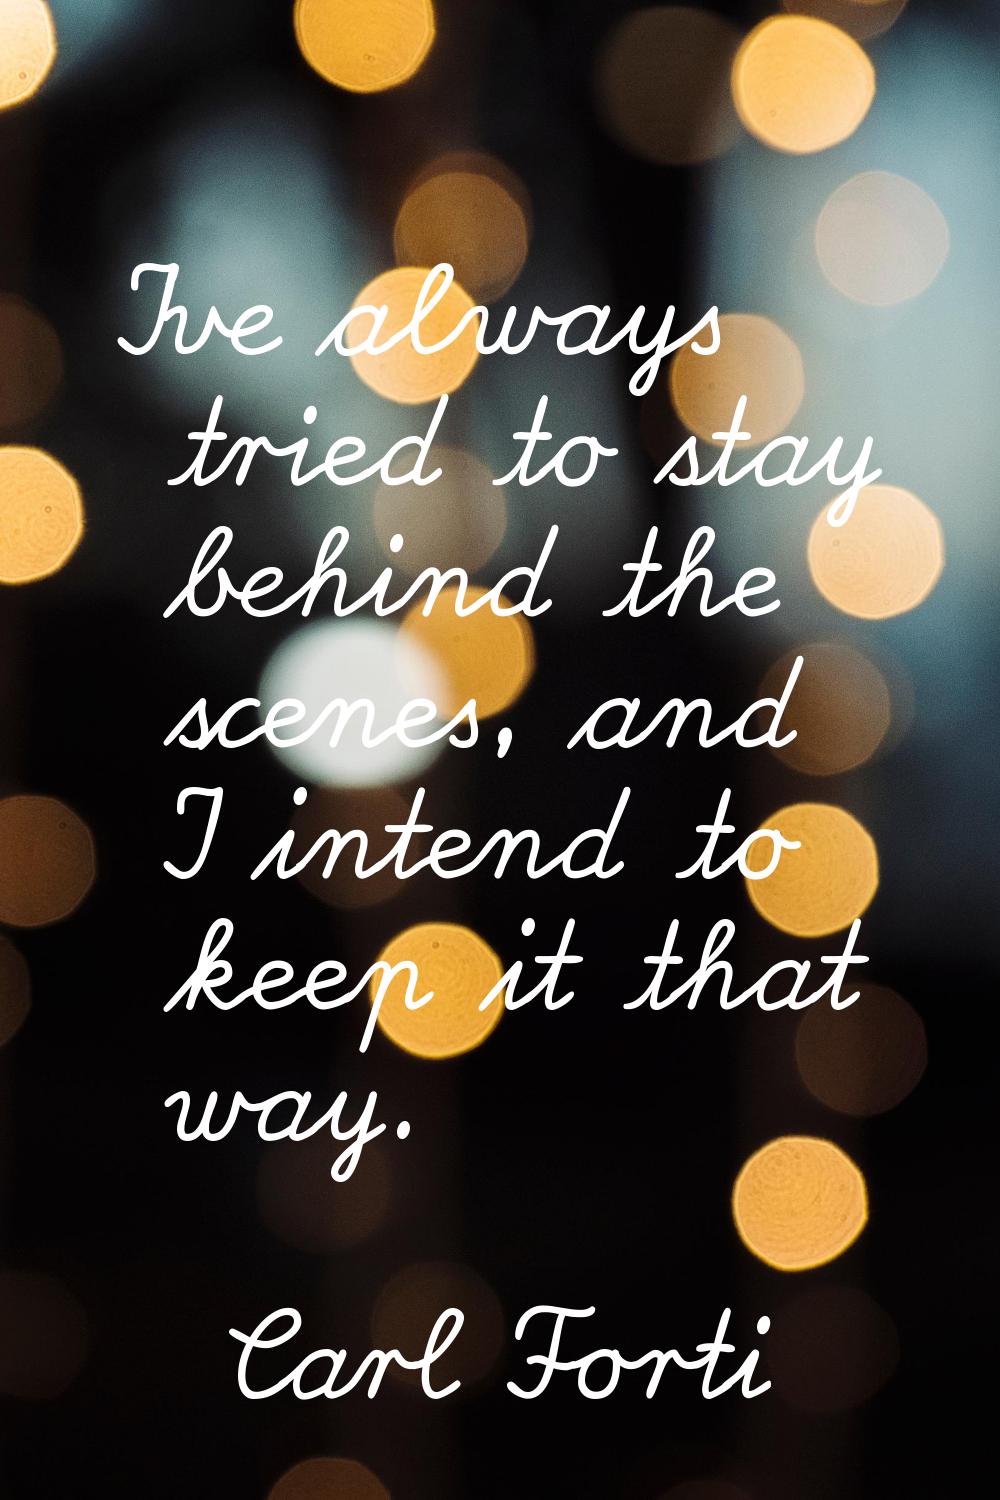 I've always tried to stay behind the scenes, and I intend to keep it that way.